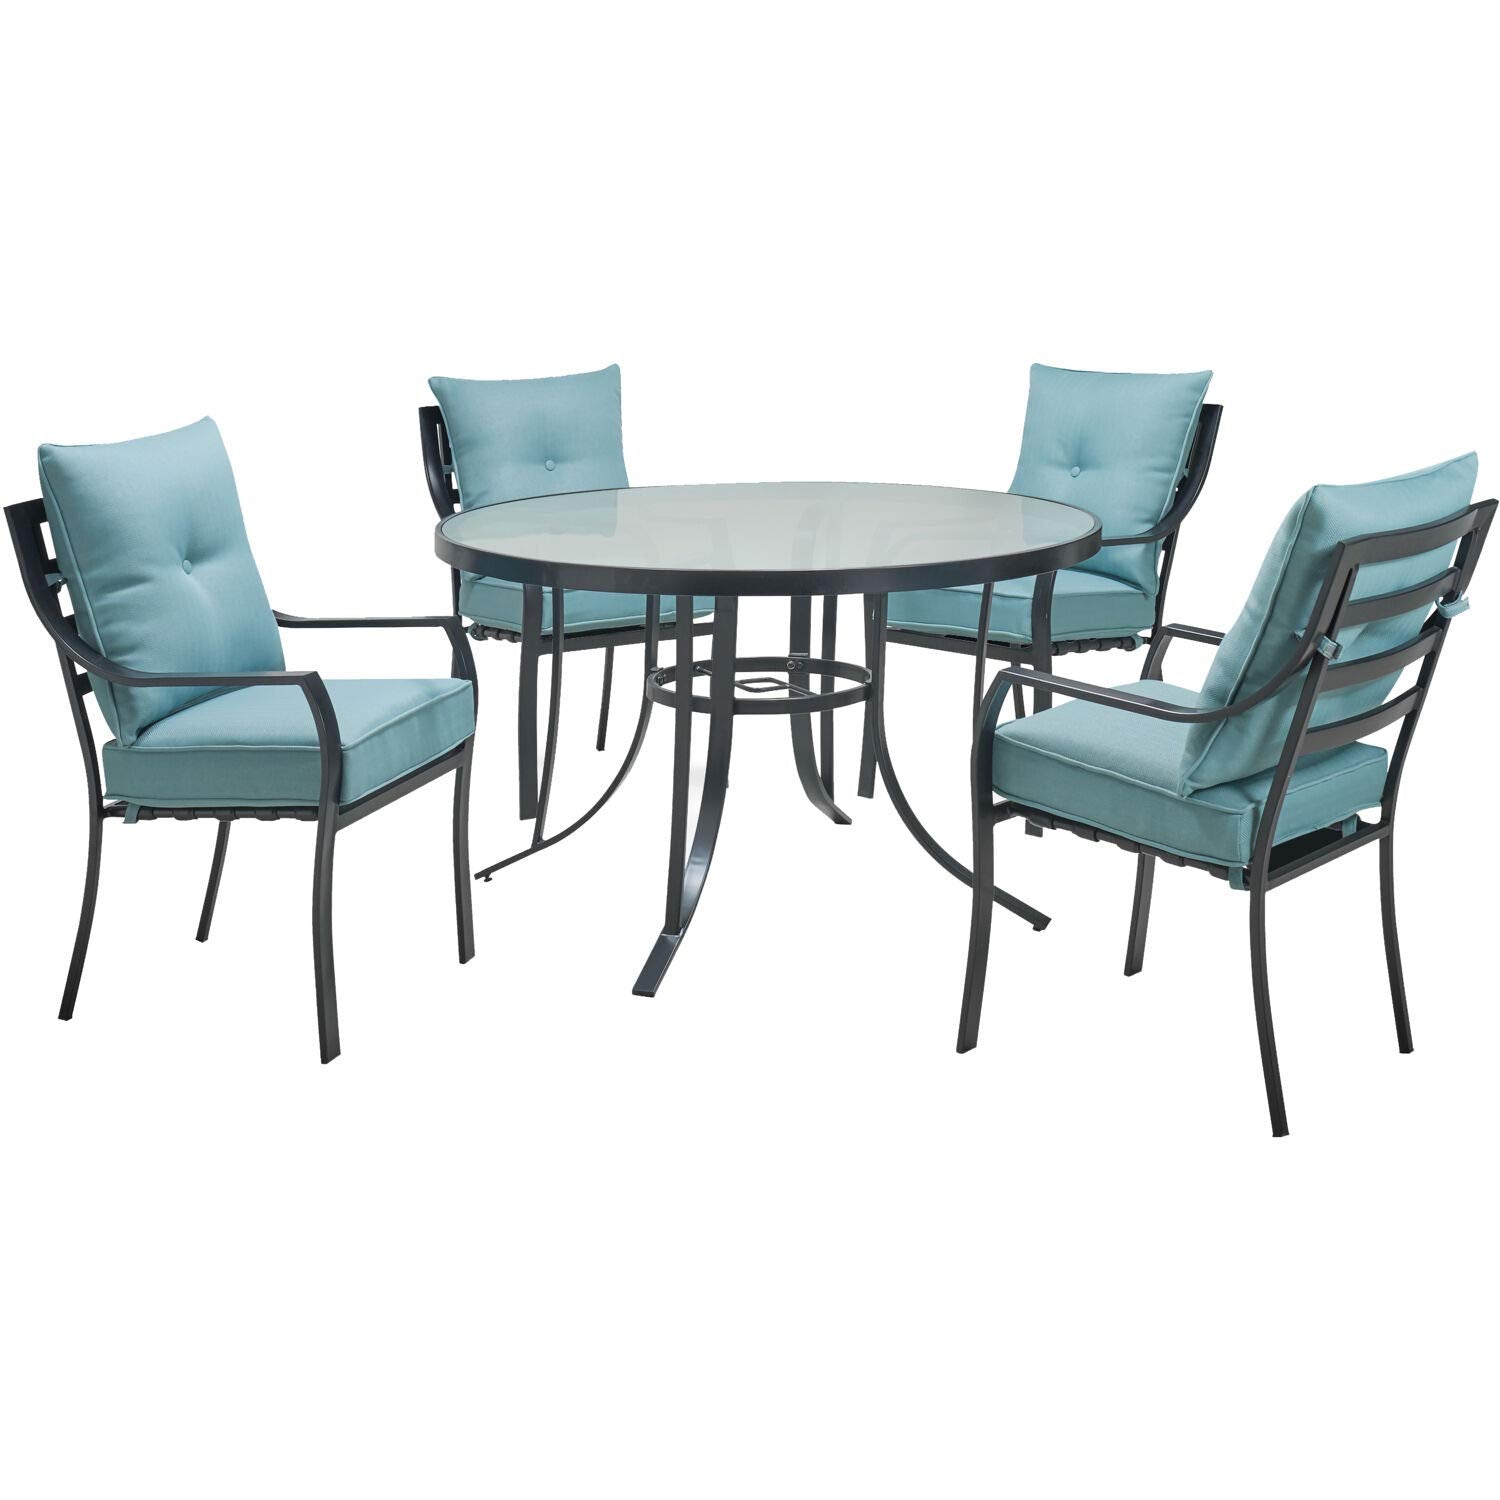 Hanover Lavallette 5-Piece Outdoor Dining Set with 9 ft. Umbrella | 4 Counter-Height Swivel Chairs | UV Protected Cushions | 52'' Round Glass-Top Table | Weather Resistant | Silver | LAVDN5PCBR-SLV-SU